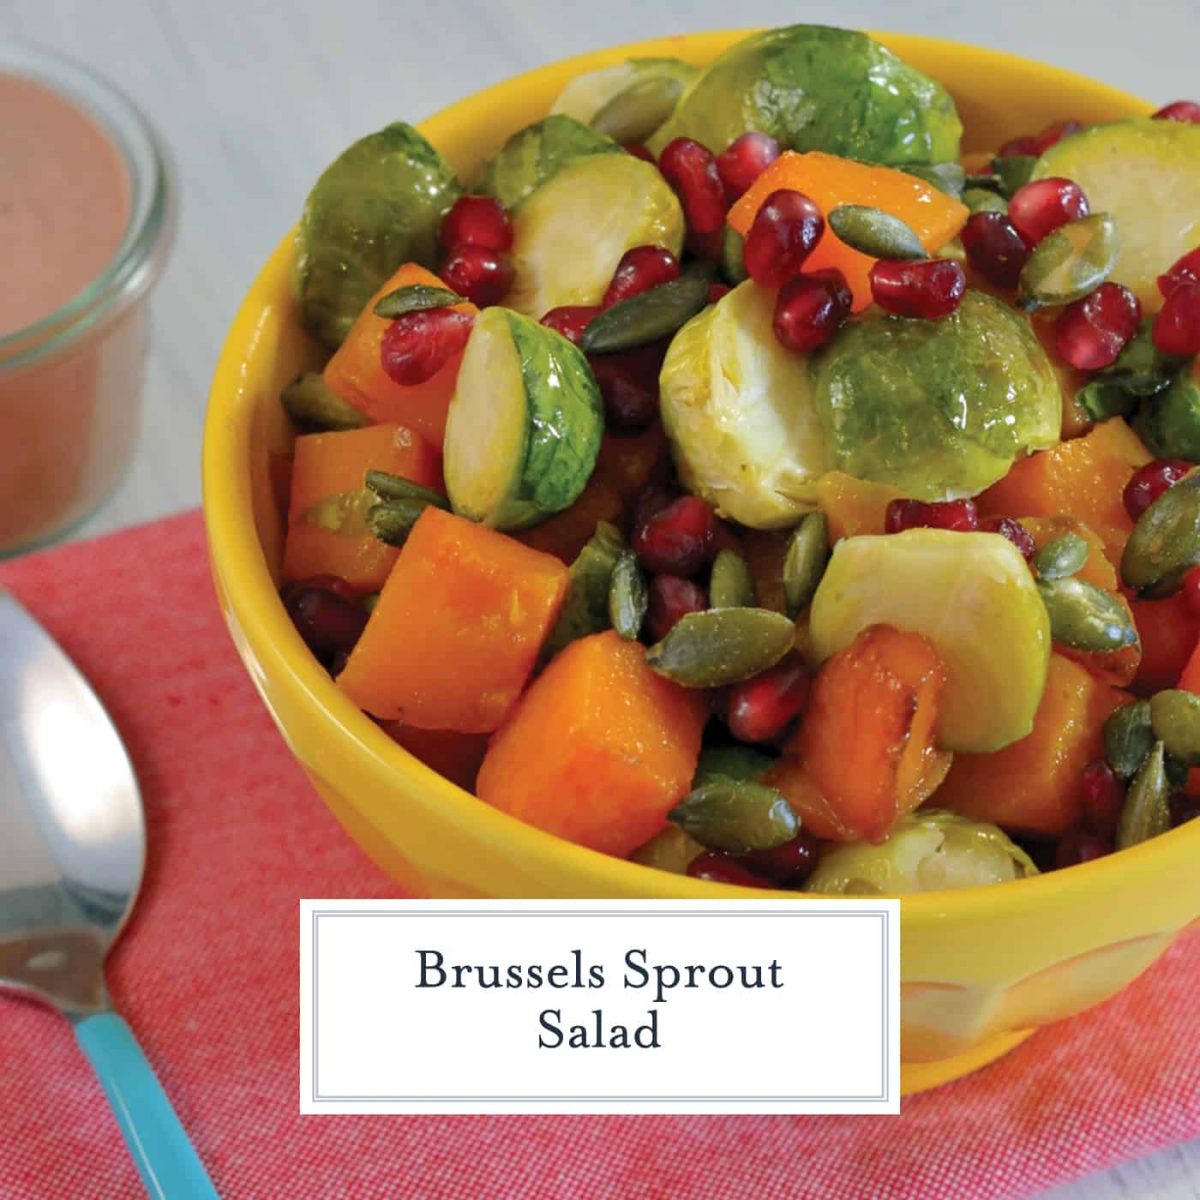 Brussels Sprout Salad Recipe is colorful and the perfect blend of sweet, salty, and savory. This dish is sure to have your guests going back for seconds. #brusselssprouts #sidedish #sweetandsavory www.savoryexperiments.com